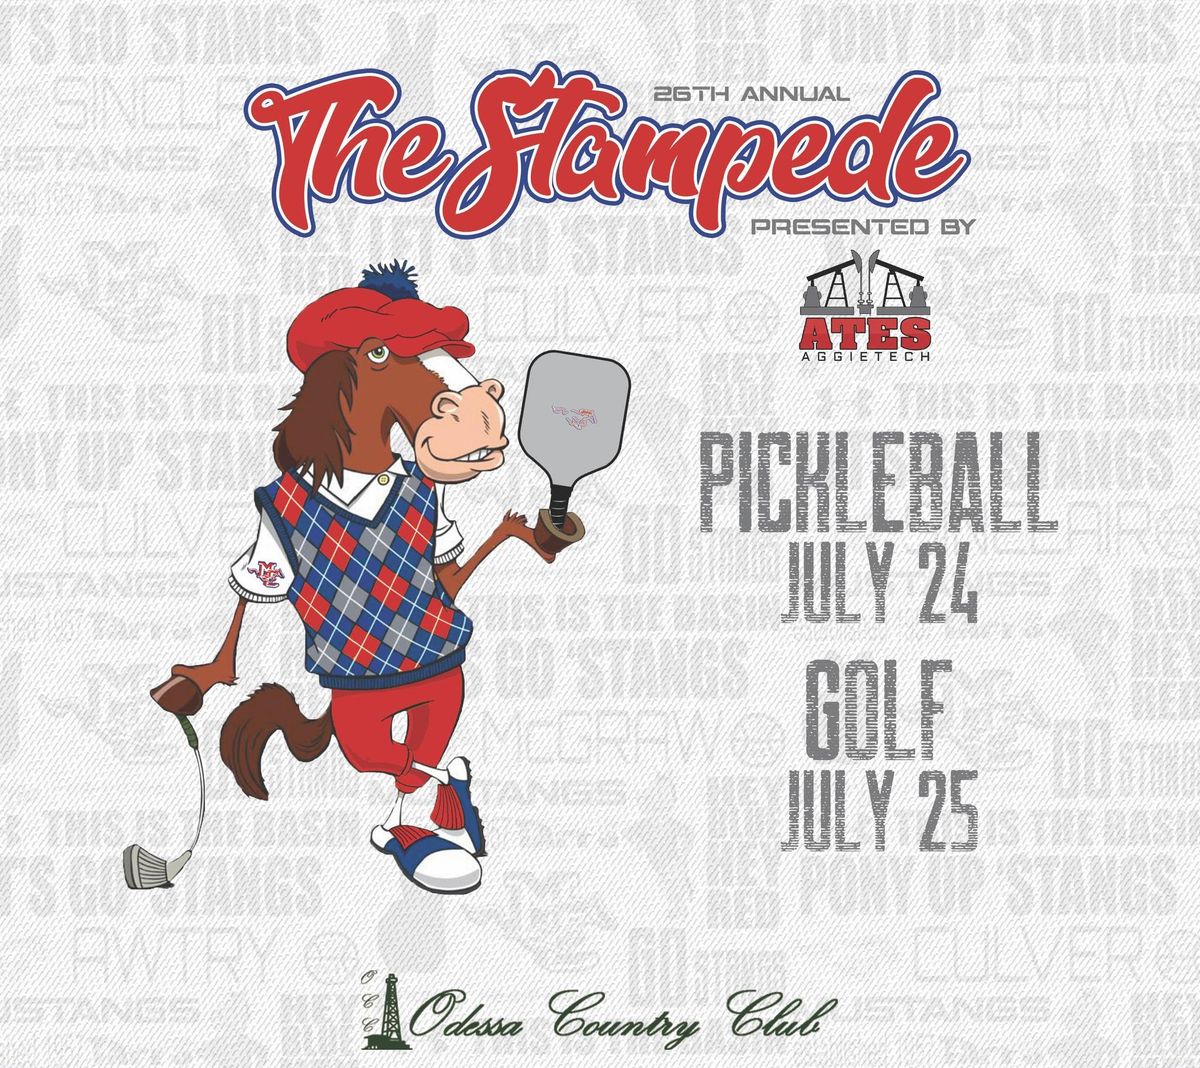 Midland Christian Booster Club Stampede Golf & Pickleball Tournament, Presented by AggieTech